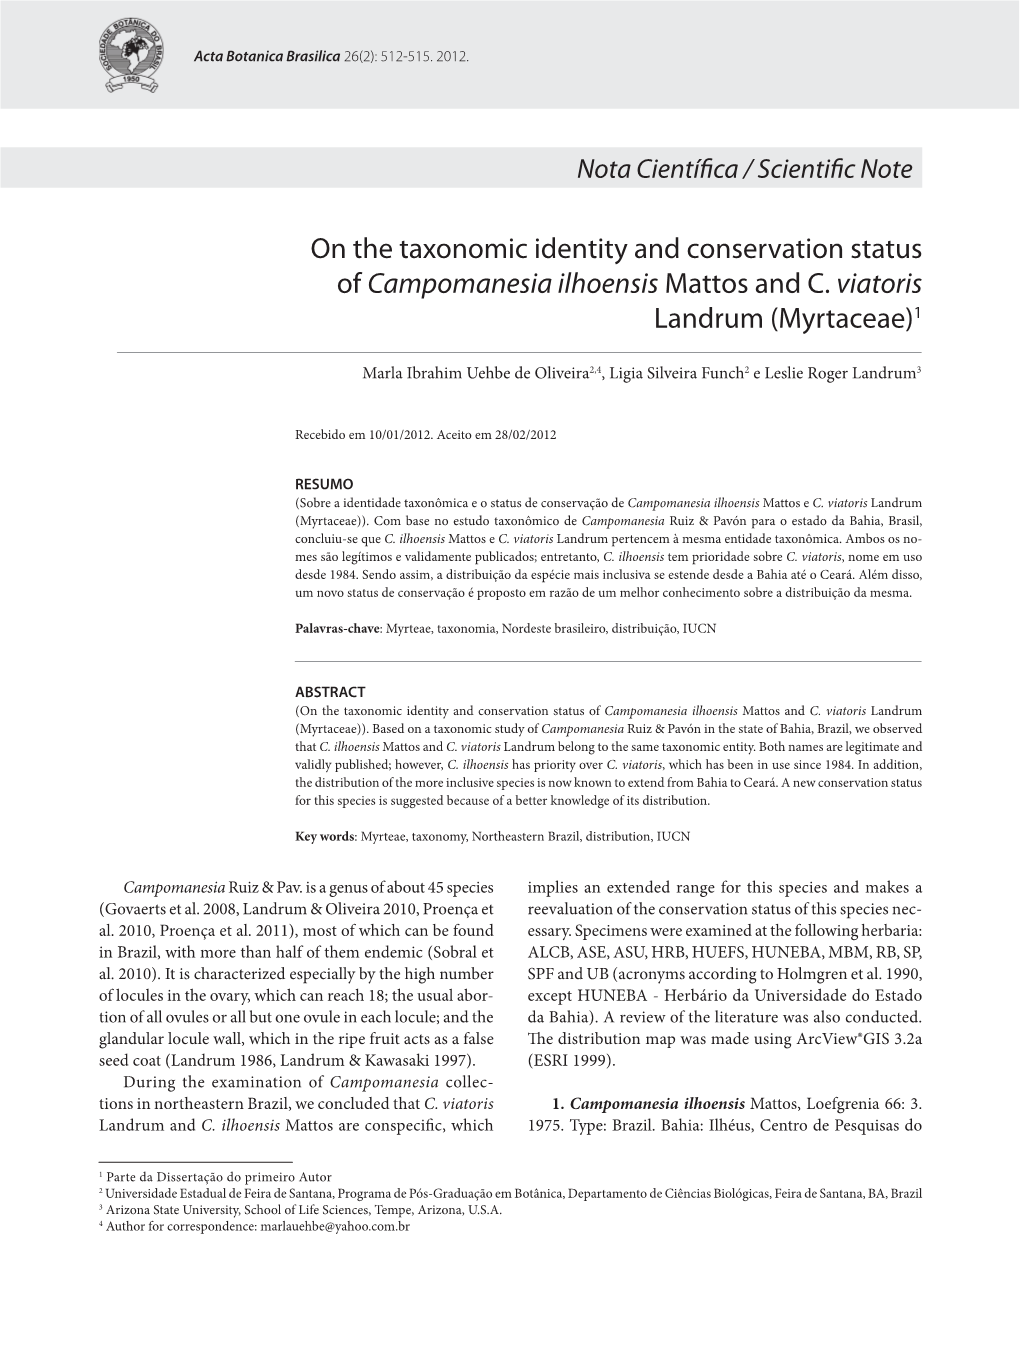 On the Taxonomic Identity and Conservation Status of Campomanesia Ilhoensis Mattos and C